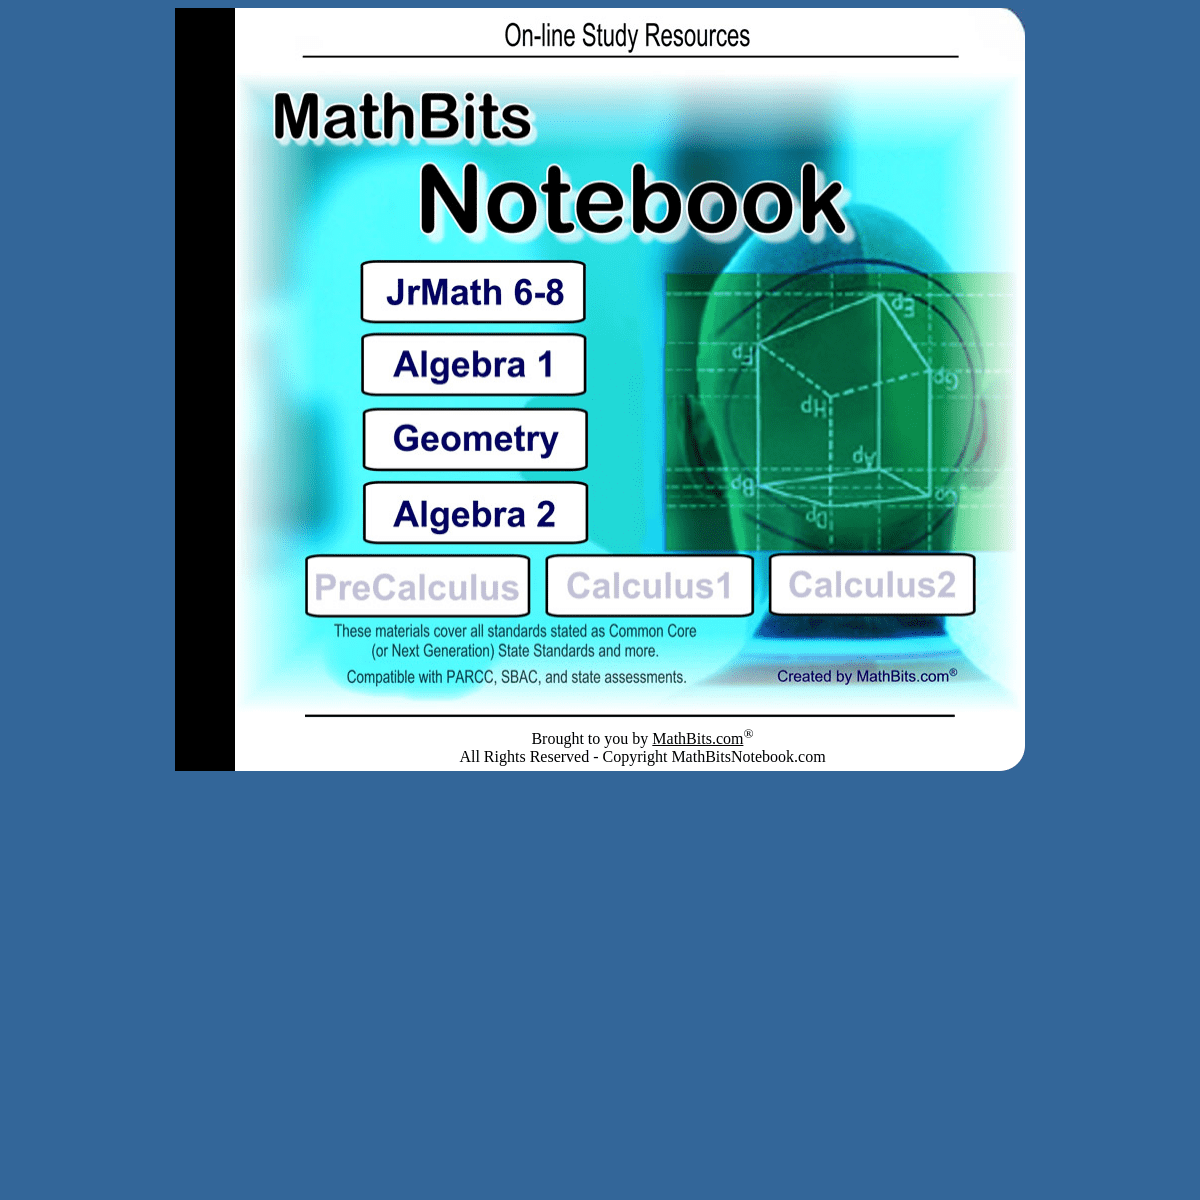 A complete backup of mathbitsnotebook.com